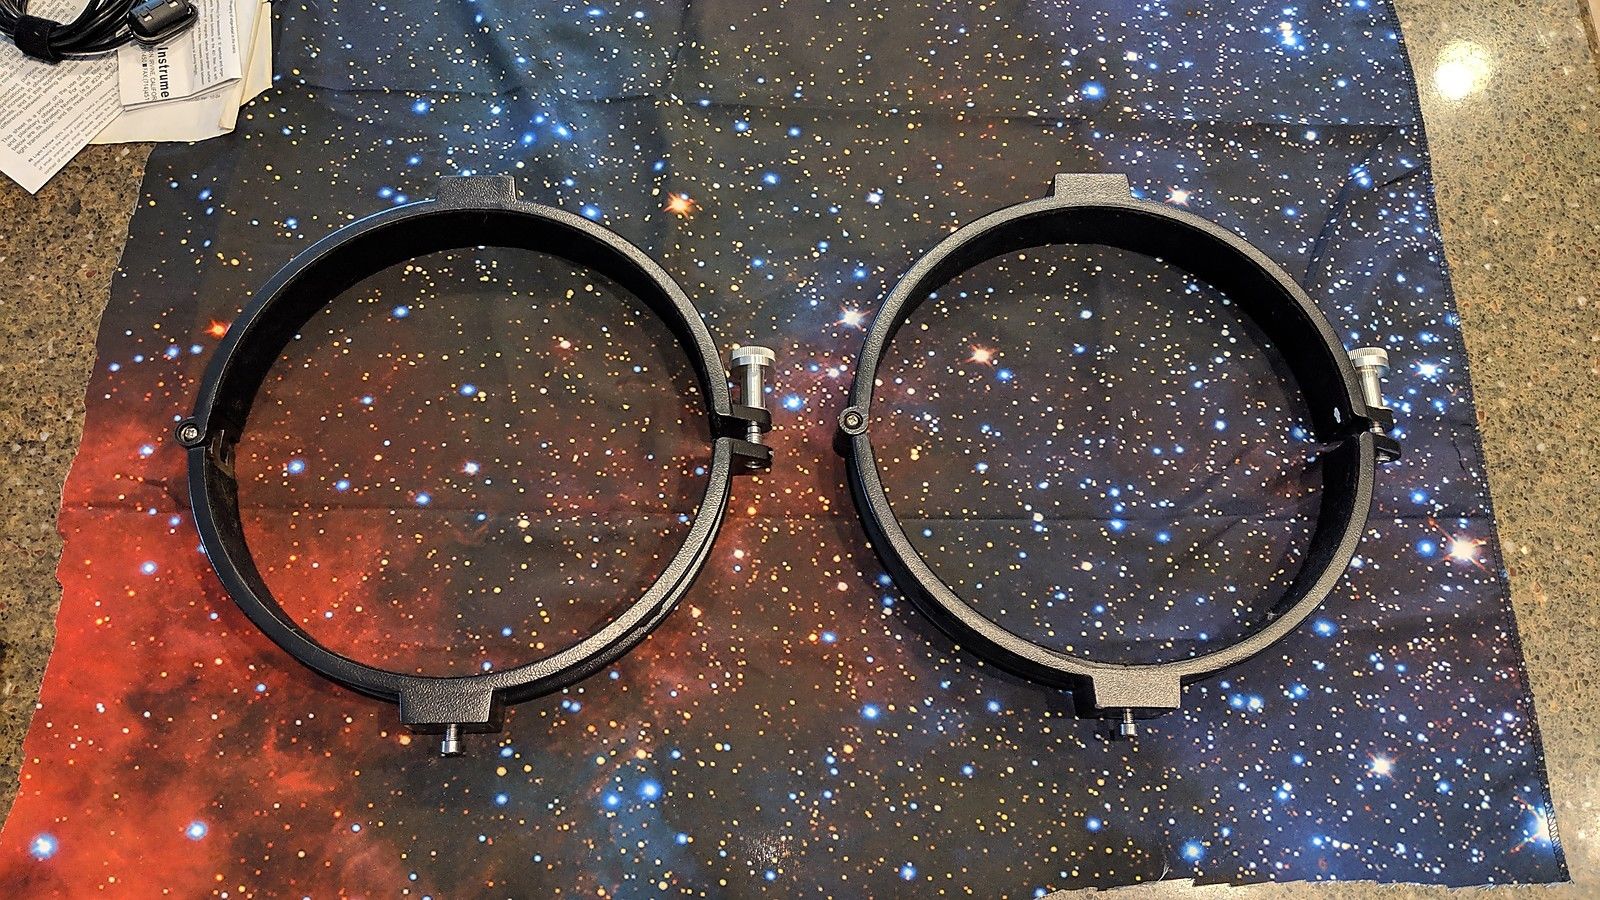 Meade LXD75 8" Tube Rings for Telescope Used Good Condition - CN 8 Inch Telescope Tube Rings Amazon